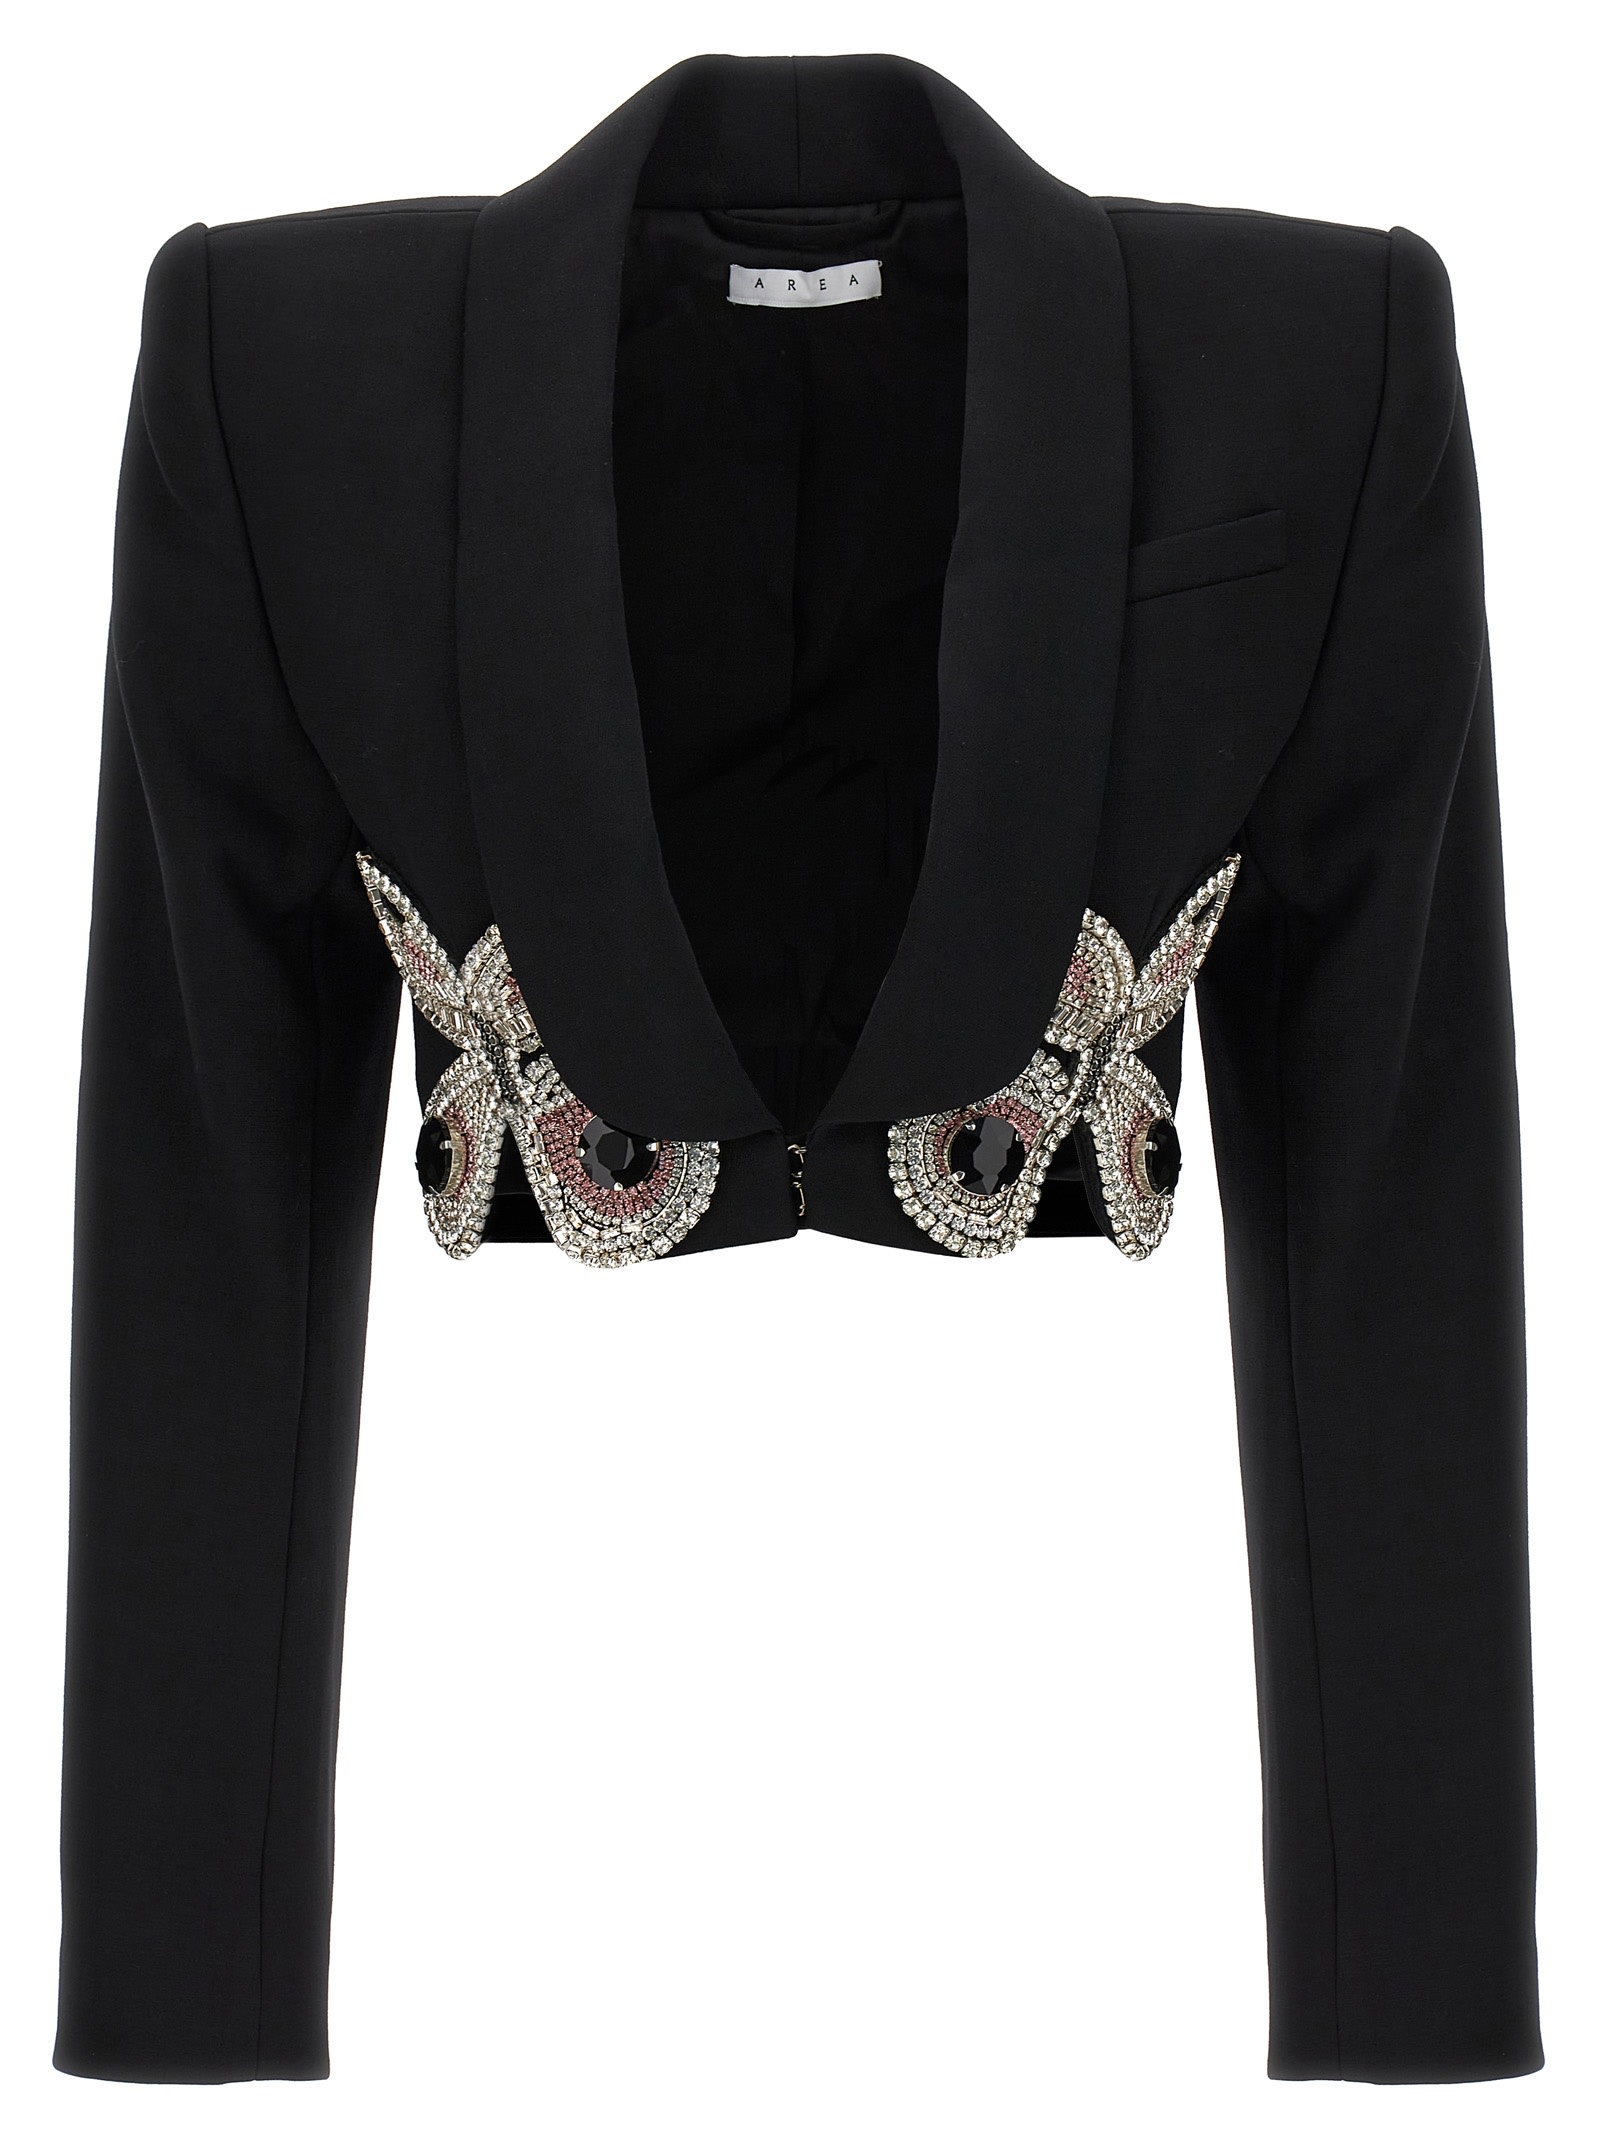 Blazer embroidered Butterfly Cropped